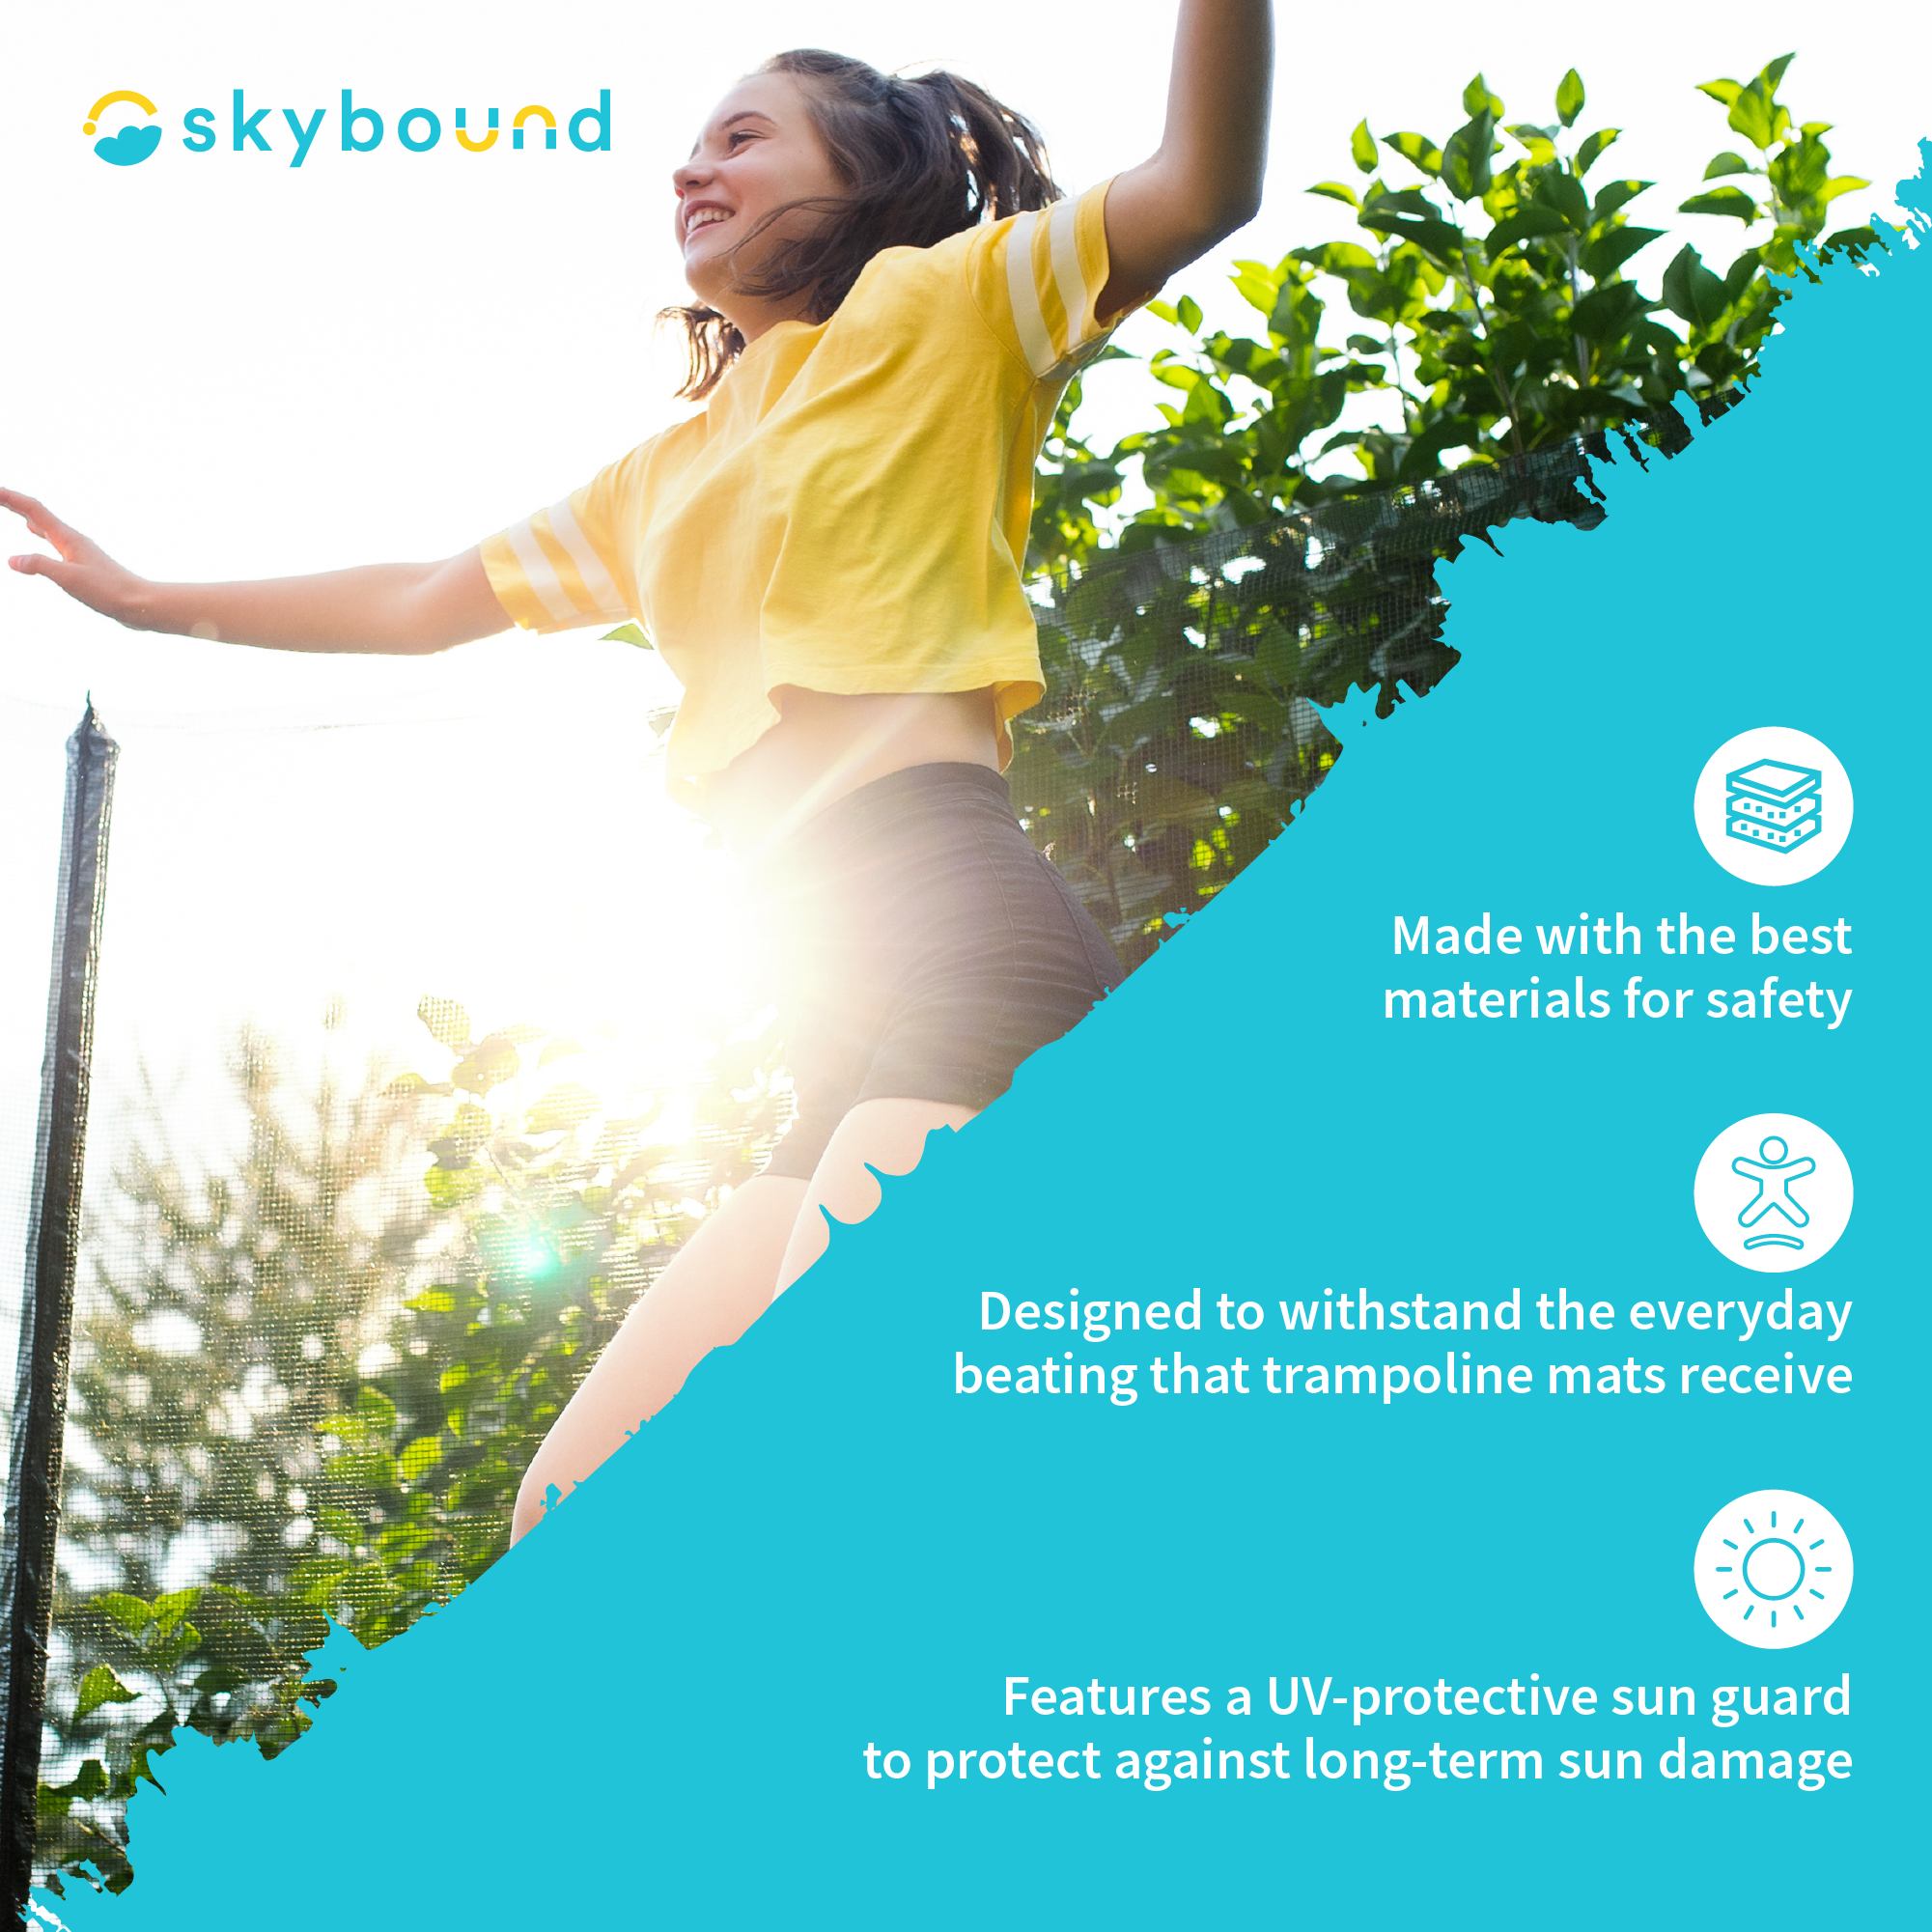 SkyBound:  Product is Made with the best materials for safety, Designed to withstand the everyday beating that trampoline mats receive, Features a UV-protective sun guard to protect against long-term sun damage.  